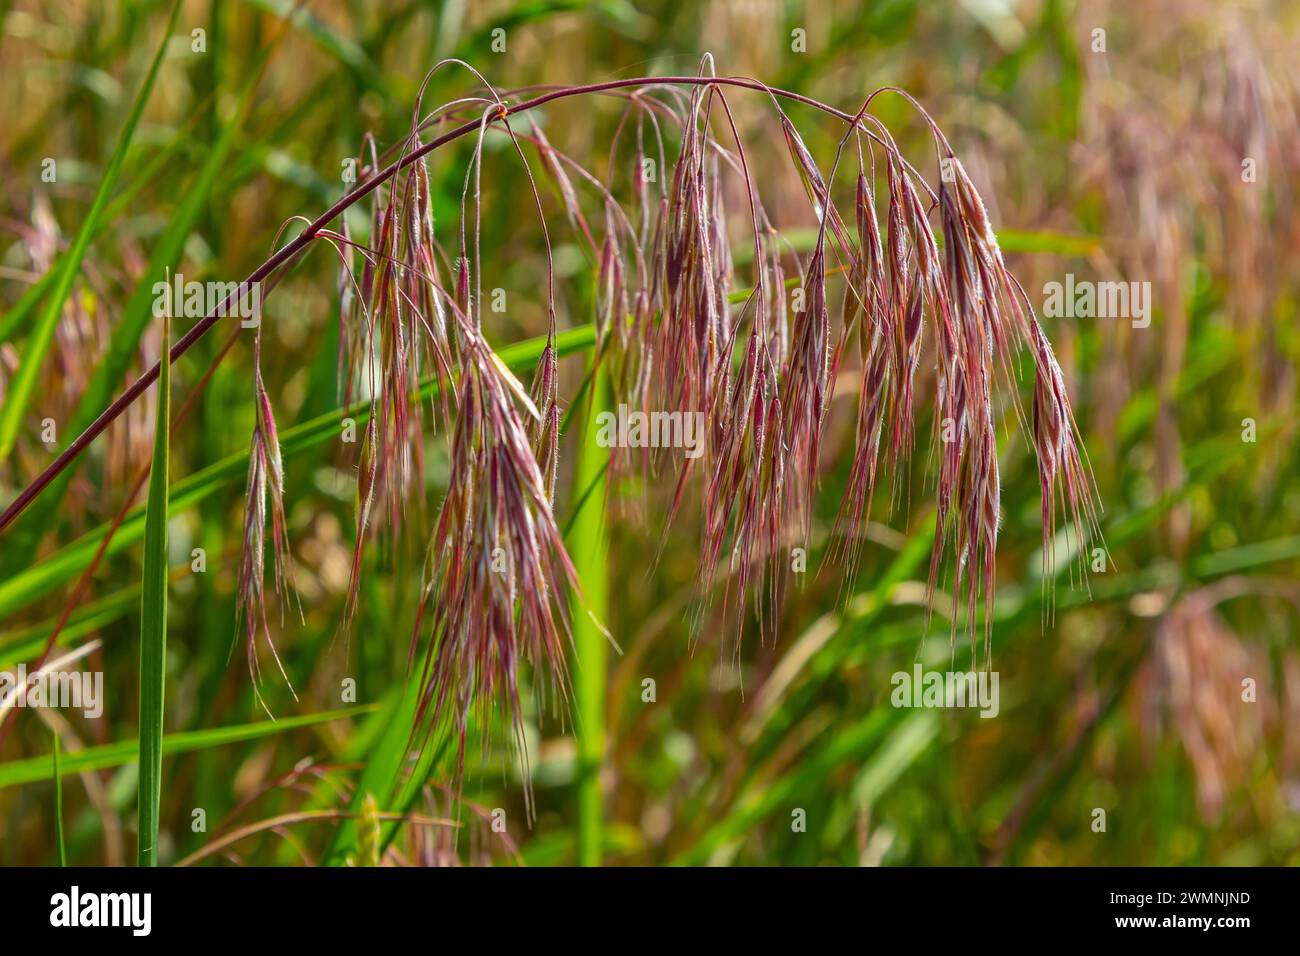 The plant Bromus sterilis, anysantha sterilis, or barren brome belongs to the Poaceae family at the time of flowering. wild cereal plant Bromus steril Stock Photo